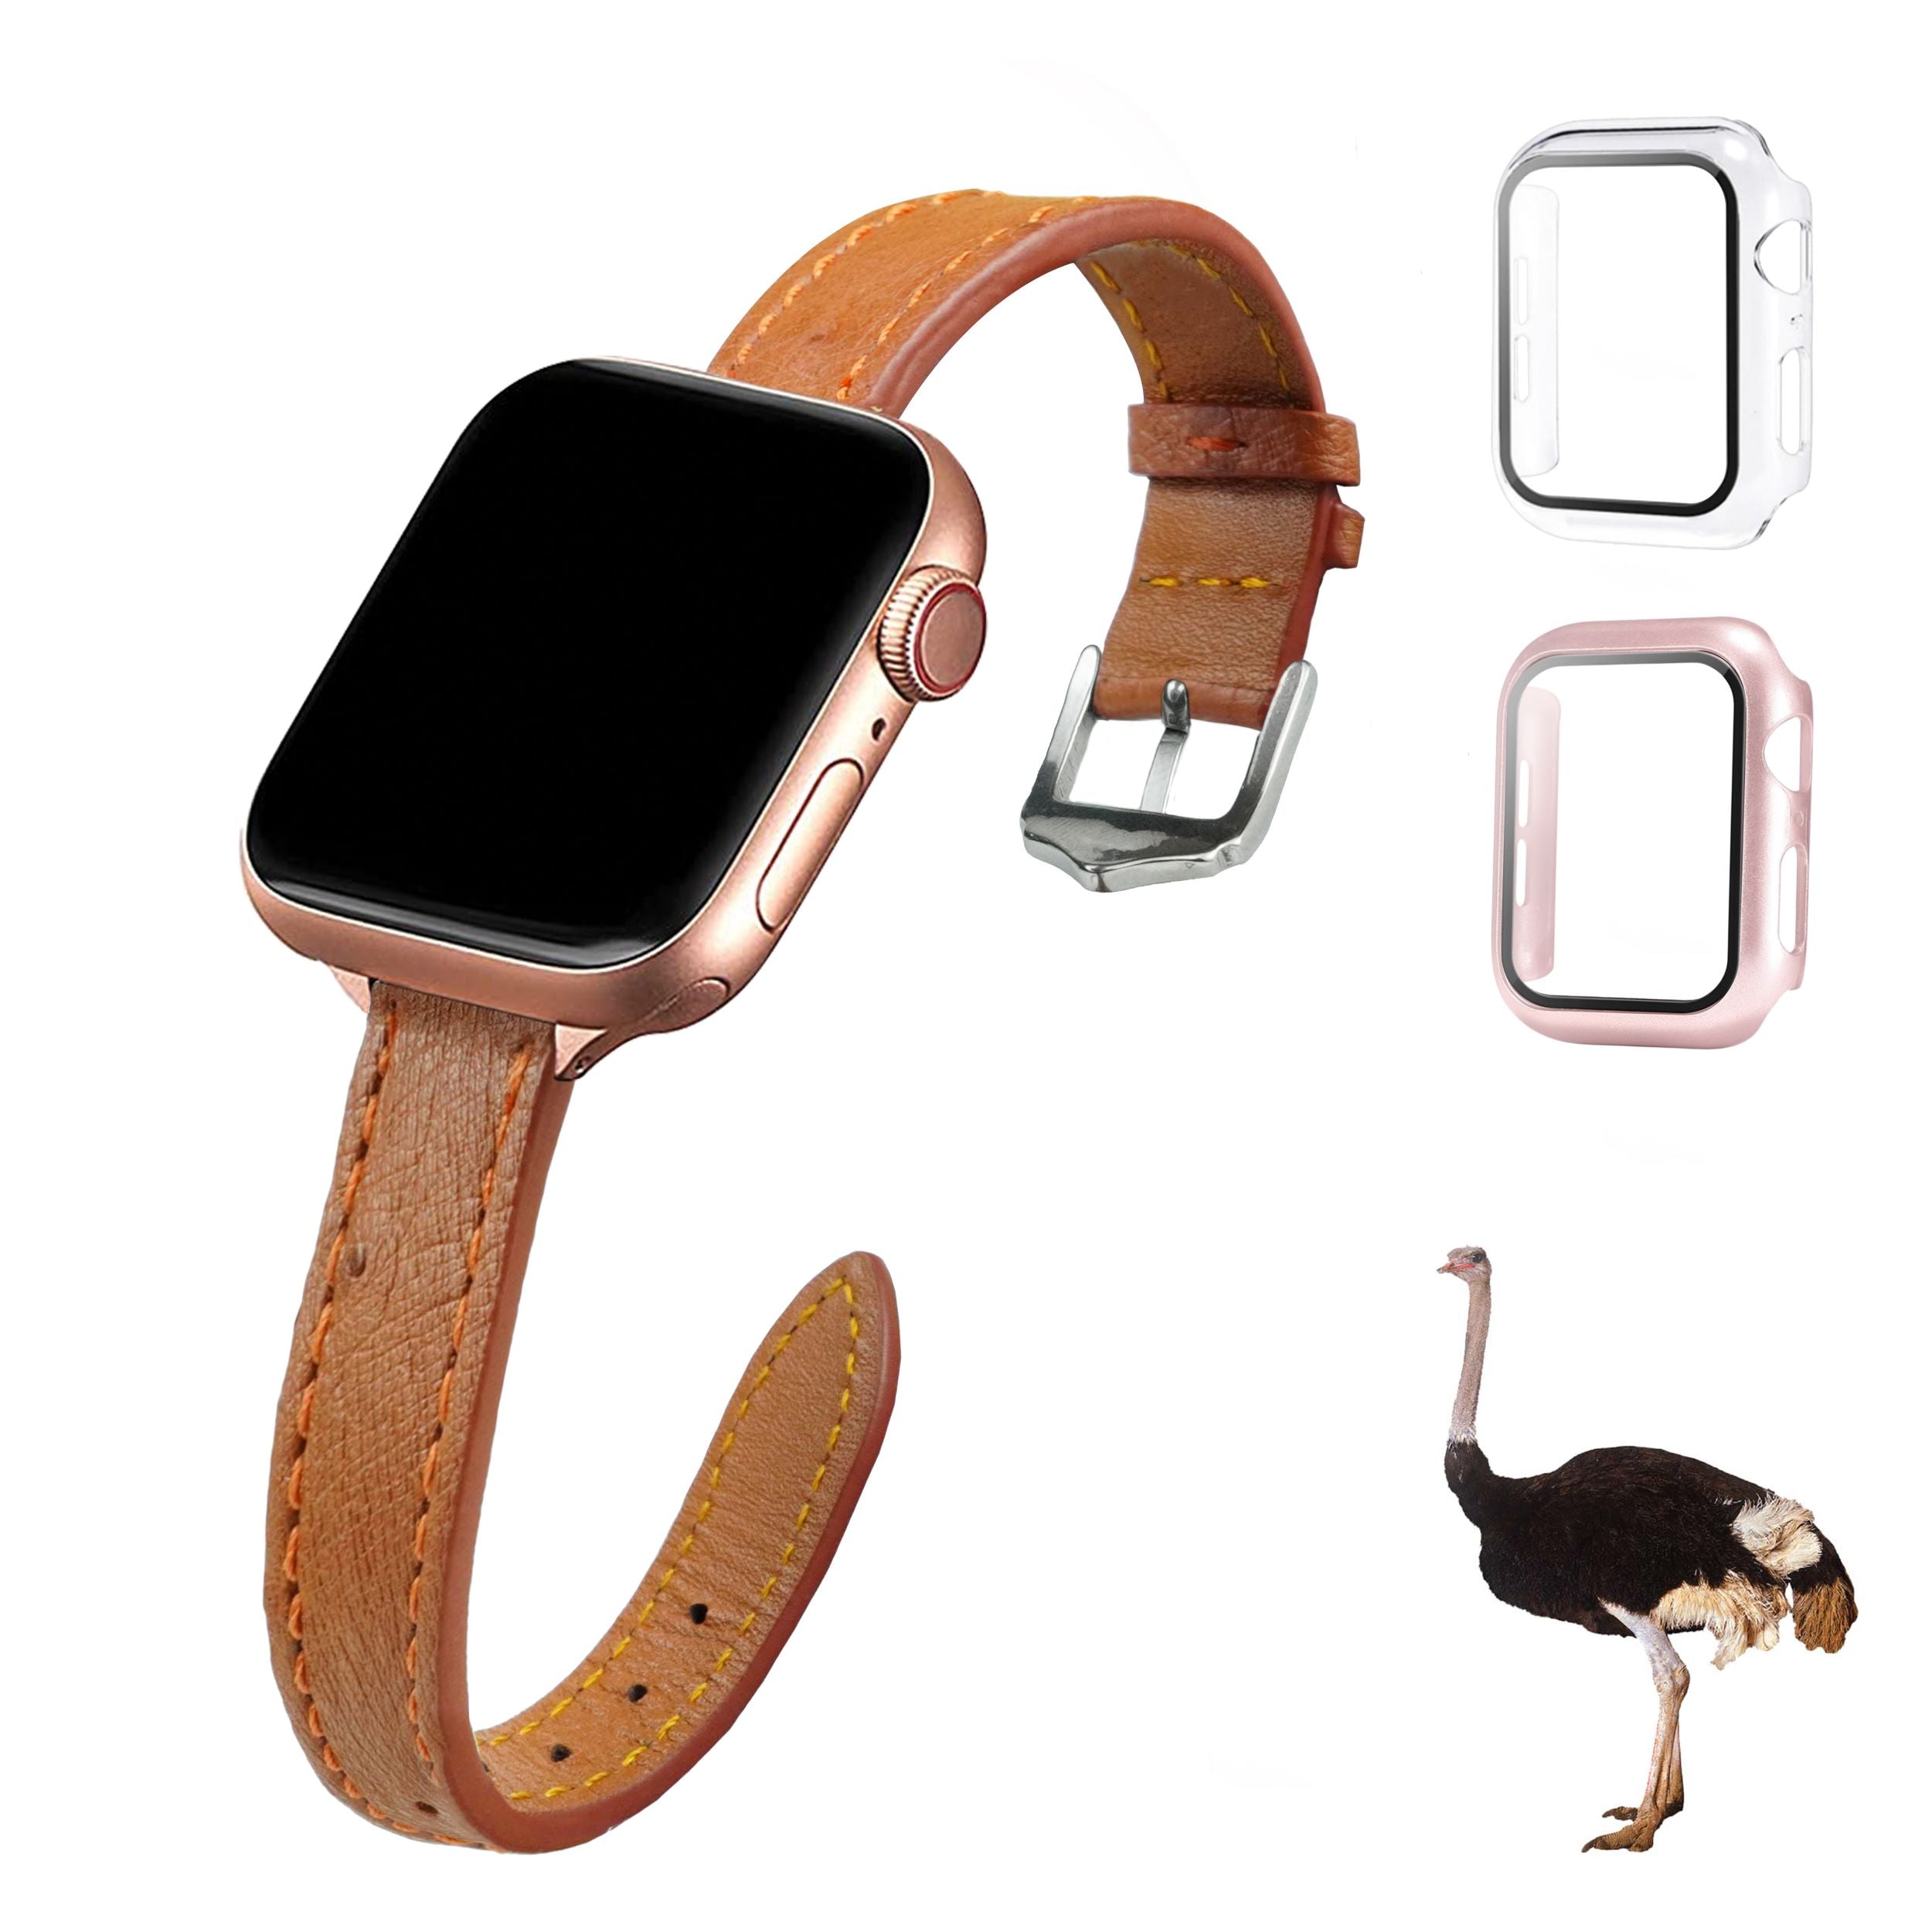 Light Brown Flat Ostrich Leather Band Compatible Apple Watch Iwatch 44mm Screen Protector Case Silver Adapter Replacement Strap For Smartwatch Series 4 5 6 SE Leather Handmade AW-186S-W-44MM